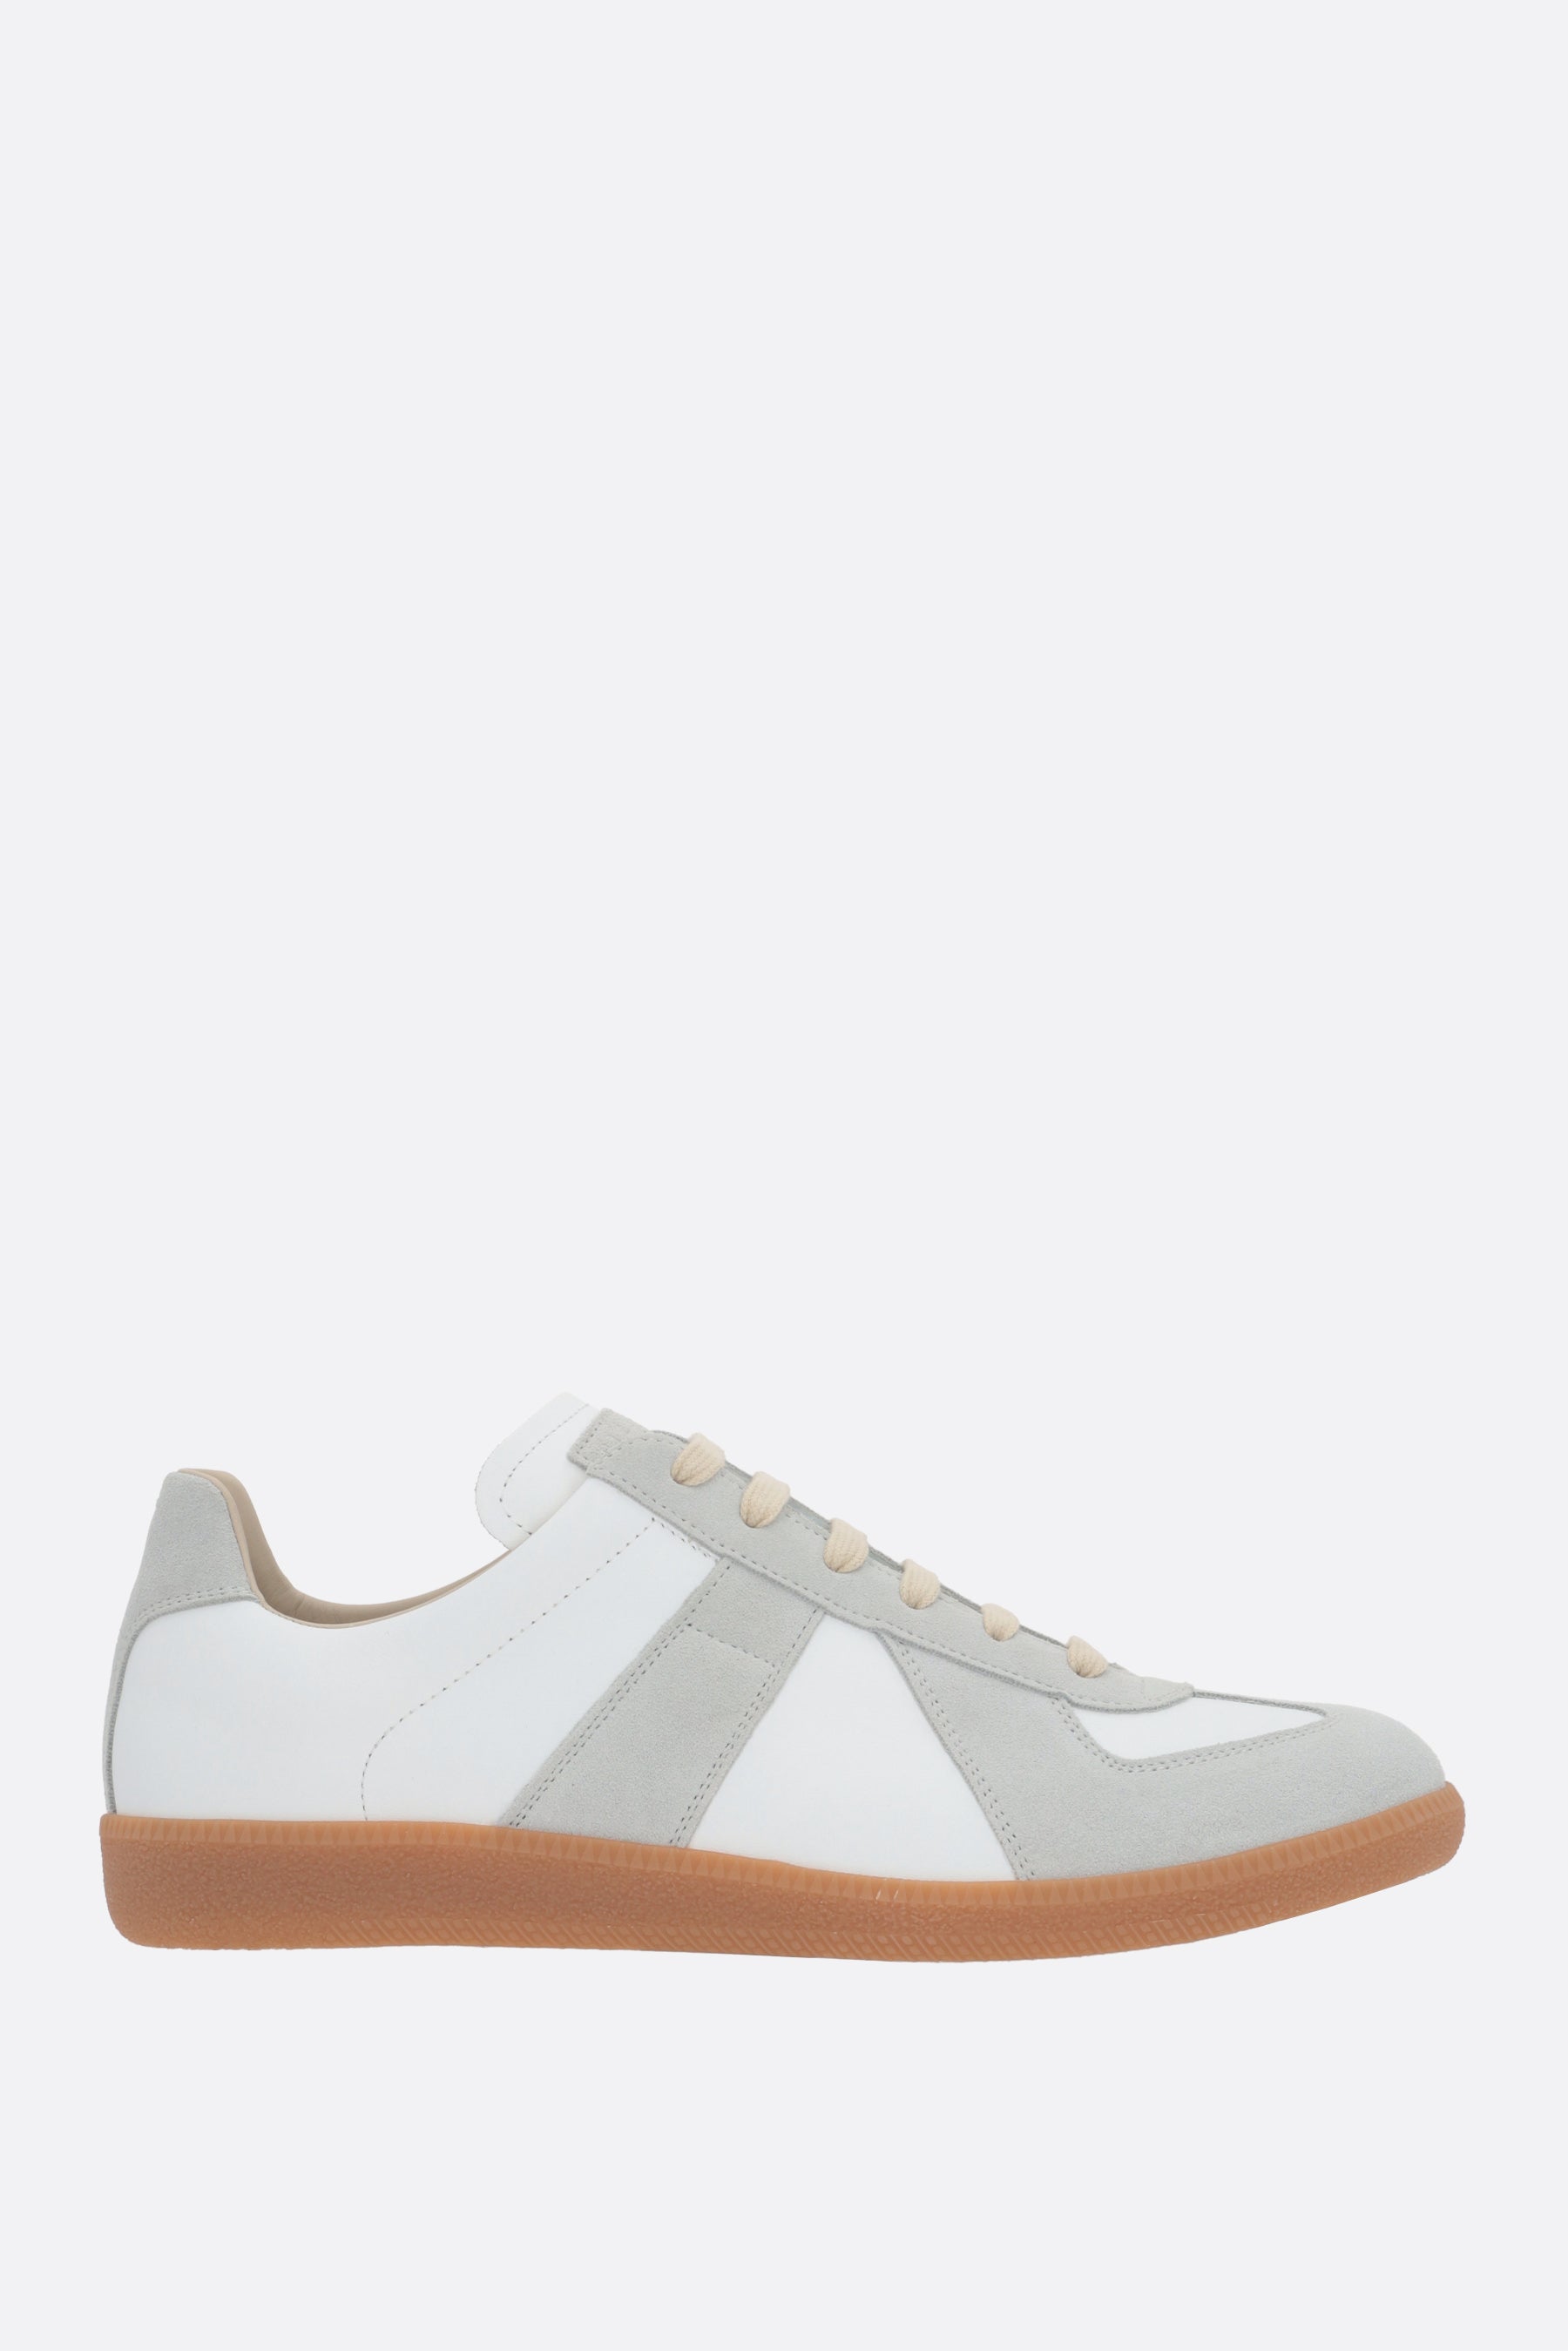 Replica smooth leather and suede sneakers